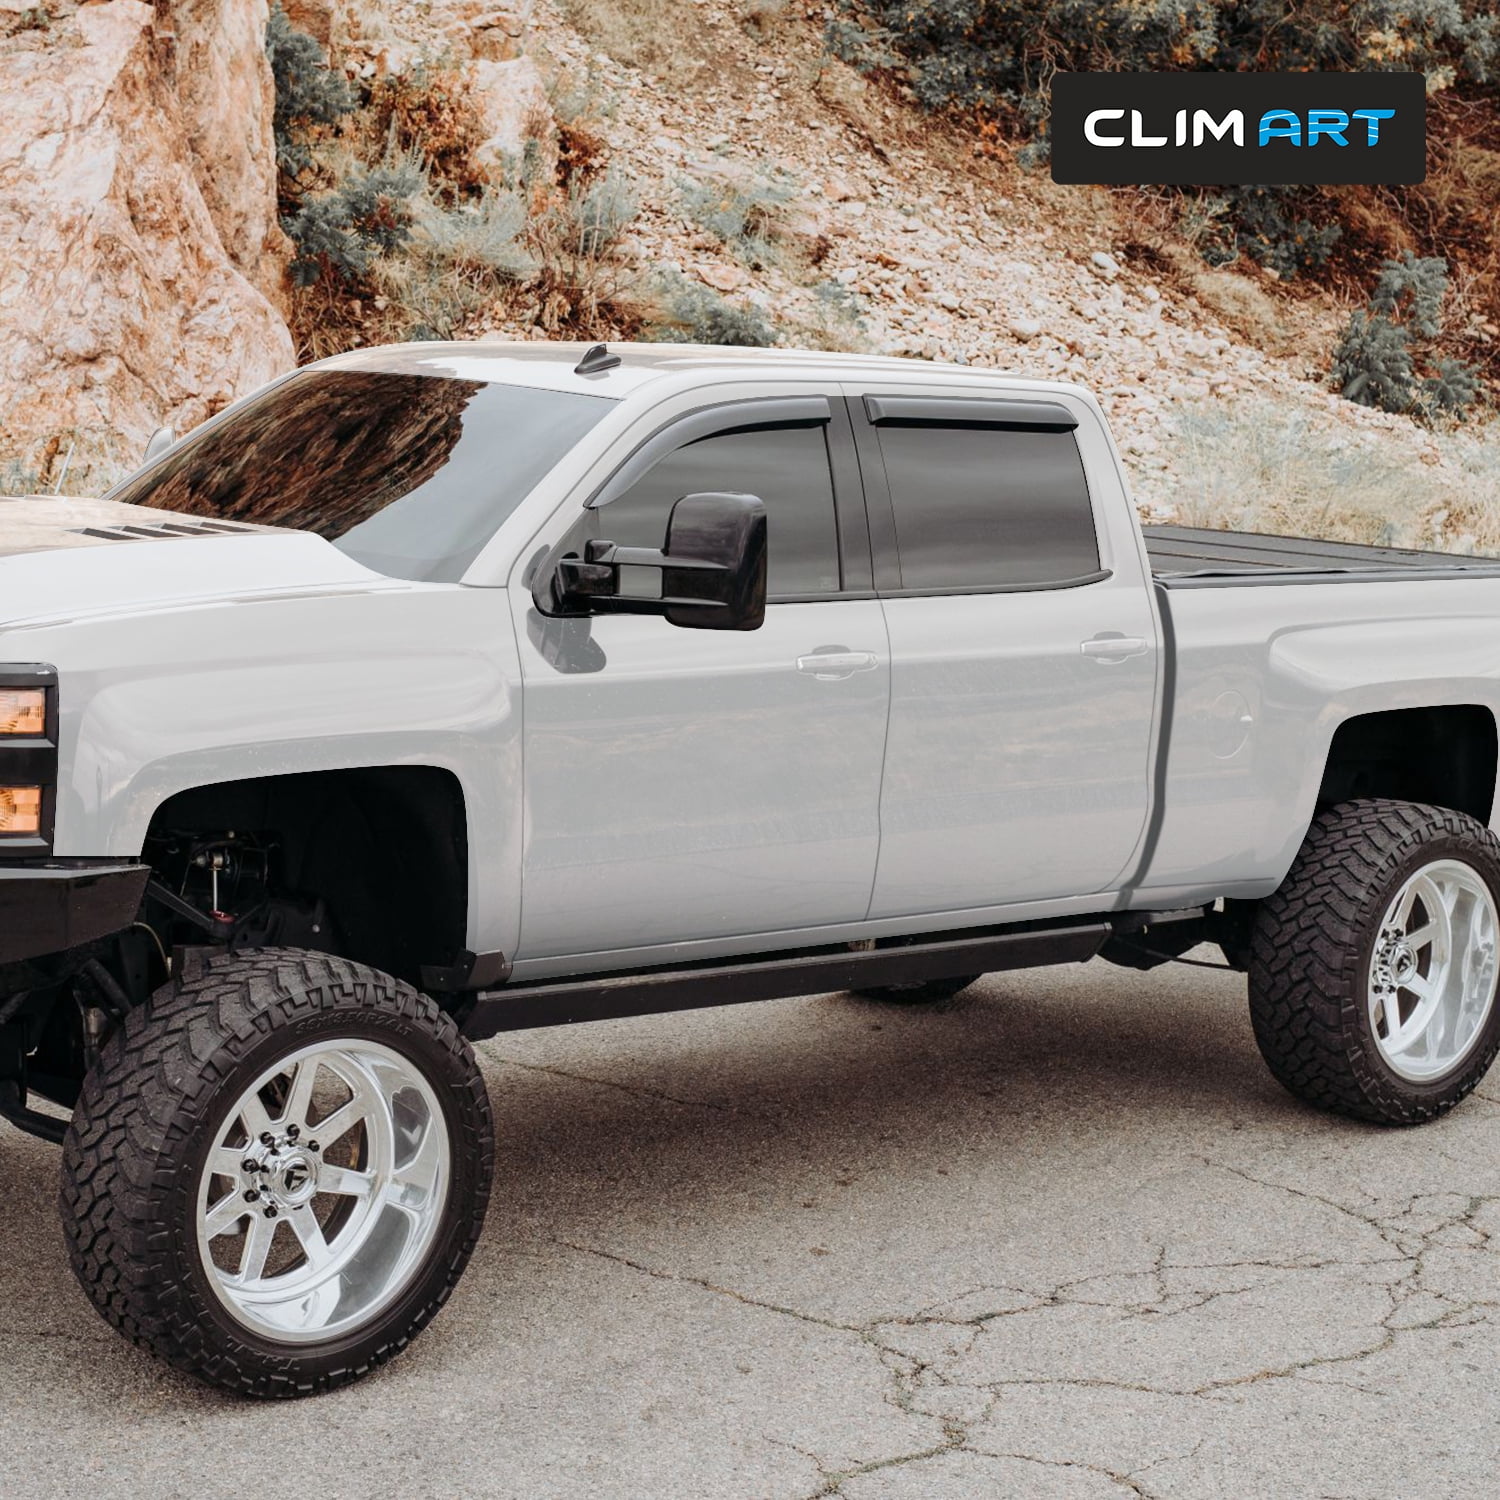 CLIM ART Incredibly Durable Rain Guards for Chevrolet (Chevy